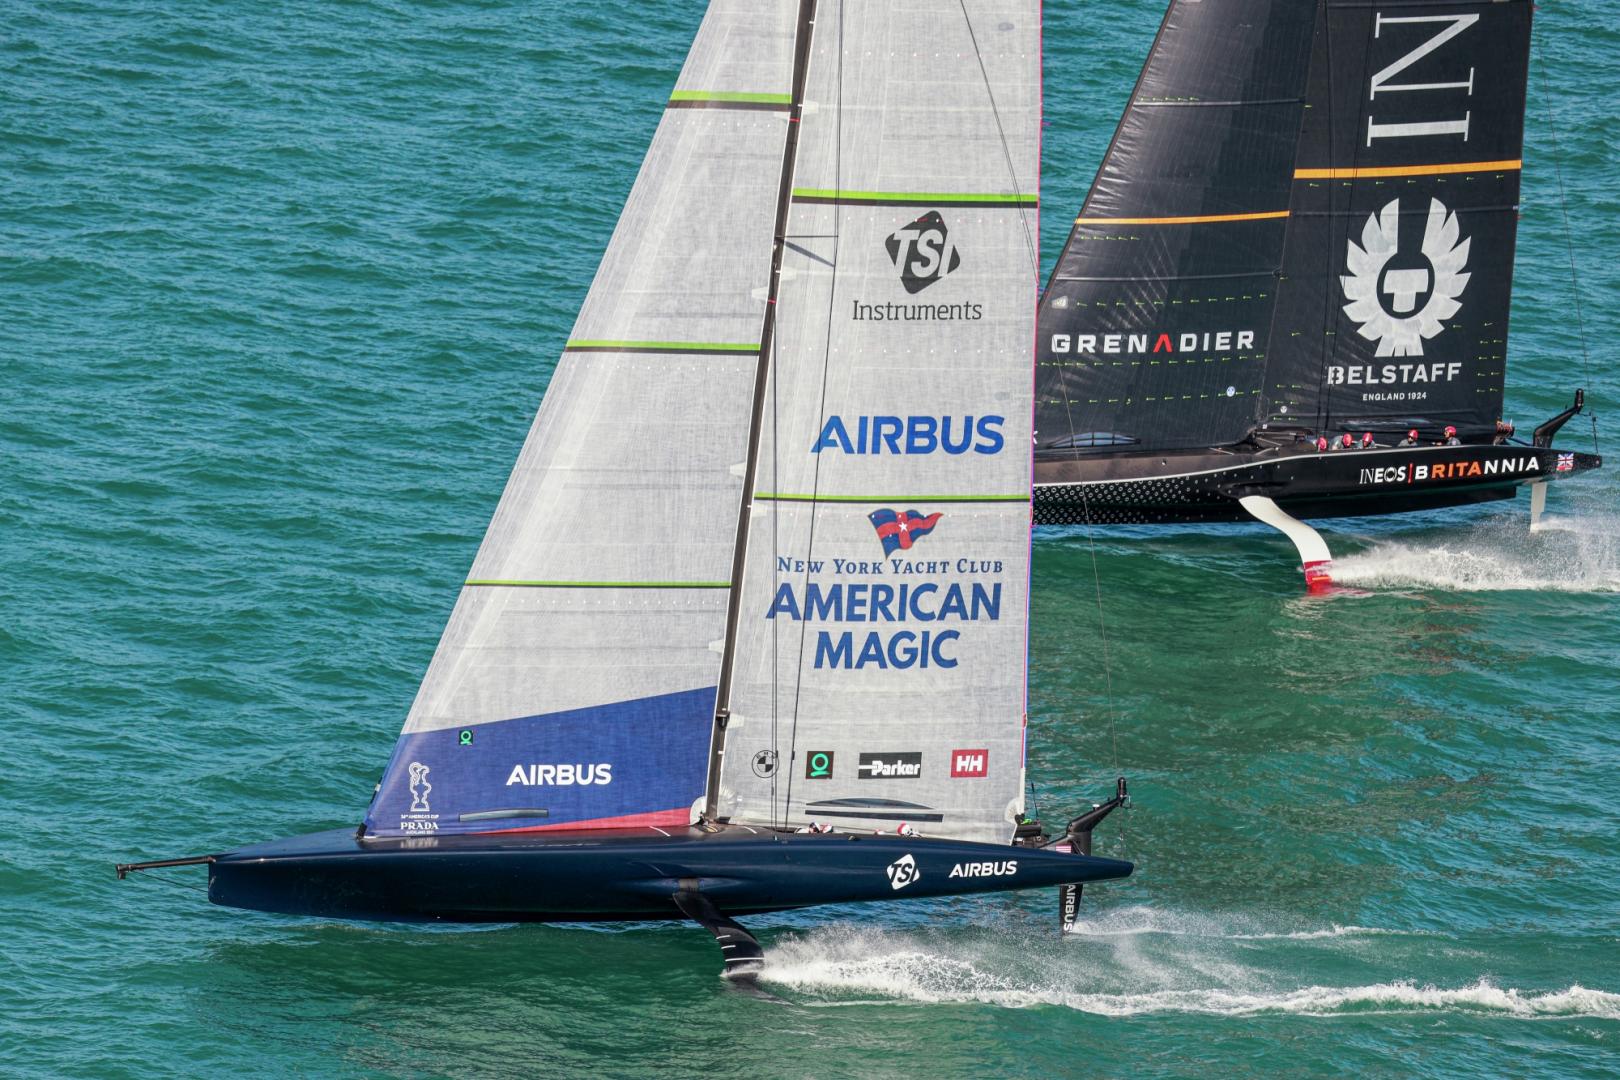 Challenger of Record, to win the America's Cup first win the Prada Cup